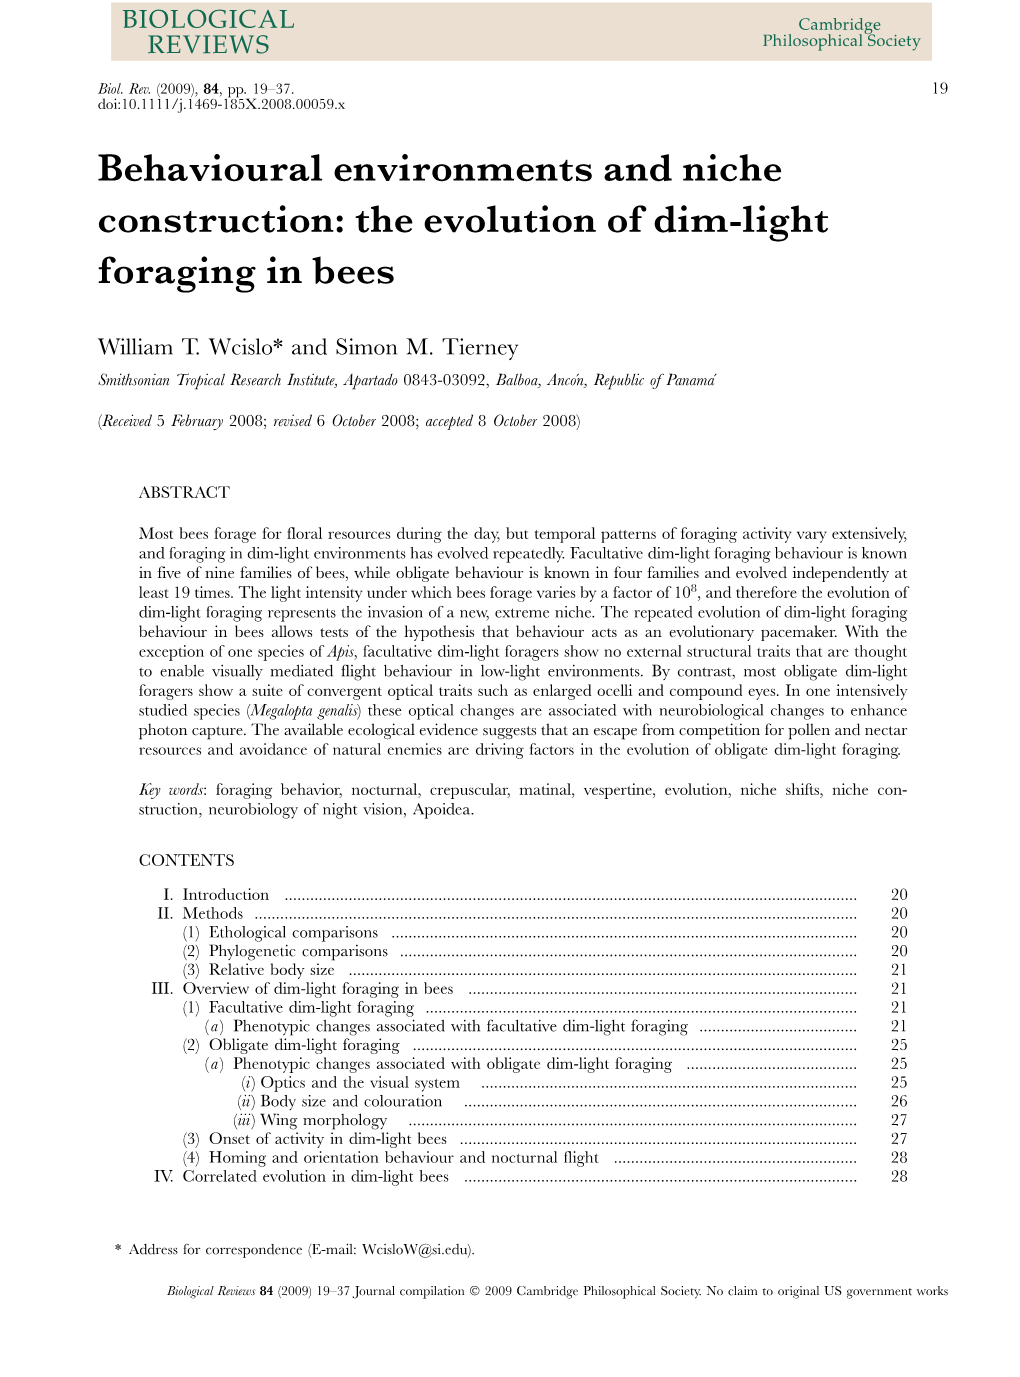 The Evolution of Dim-Light Foraging in Bees